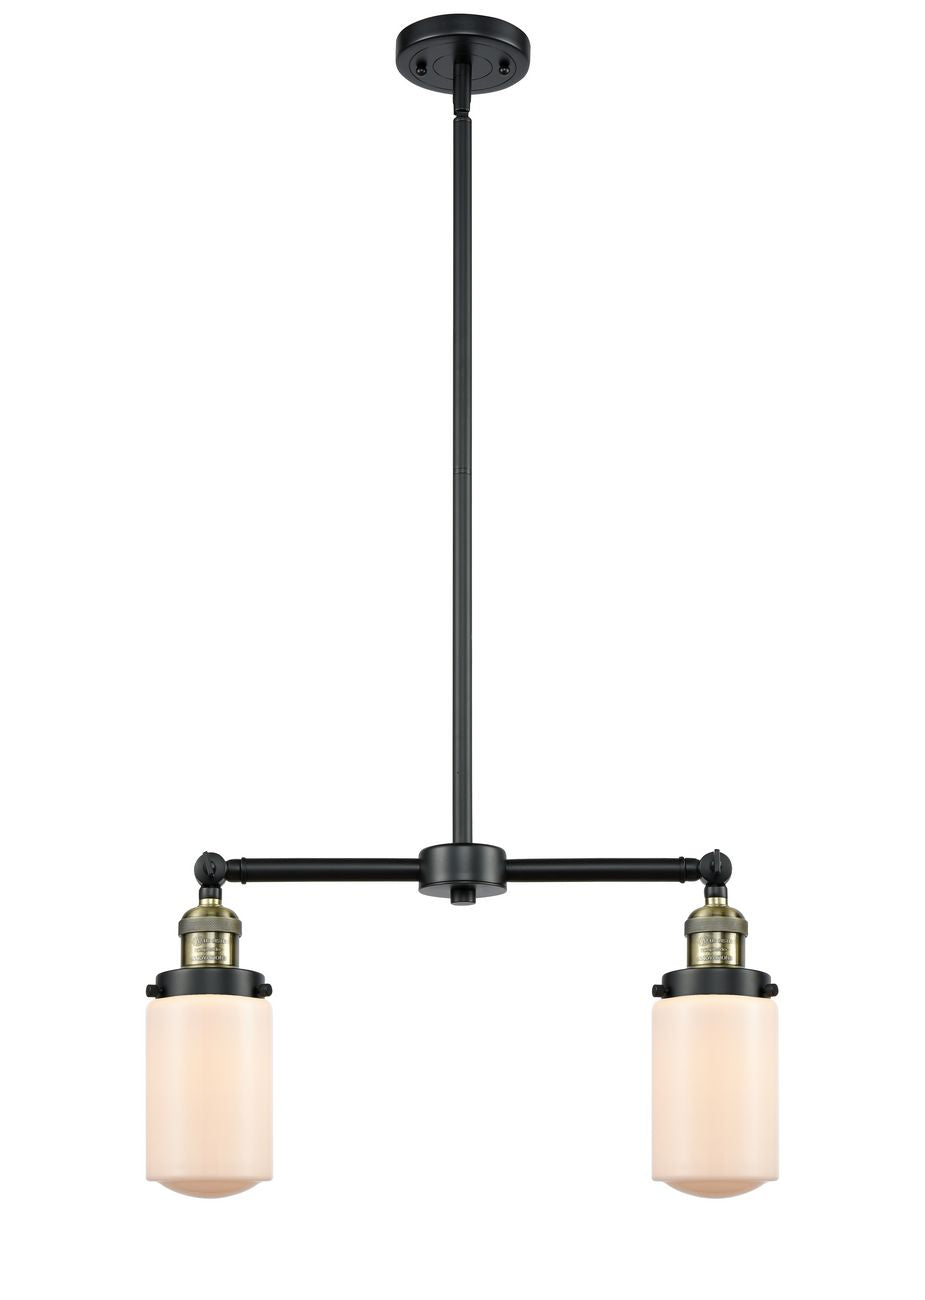 209-BAB-G311 2-Light 21" Black Antique Brass Island Light - Matte White Cased Dover Glass - LED Bulb - Dimmensions: 21 x 4.5 x 10.75<br>Minimum Height : 21.625<br>Maximum Height : 44.625 - Sloped Ceiling Compatible: Yes